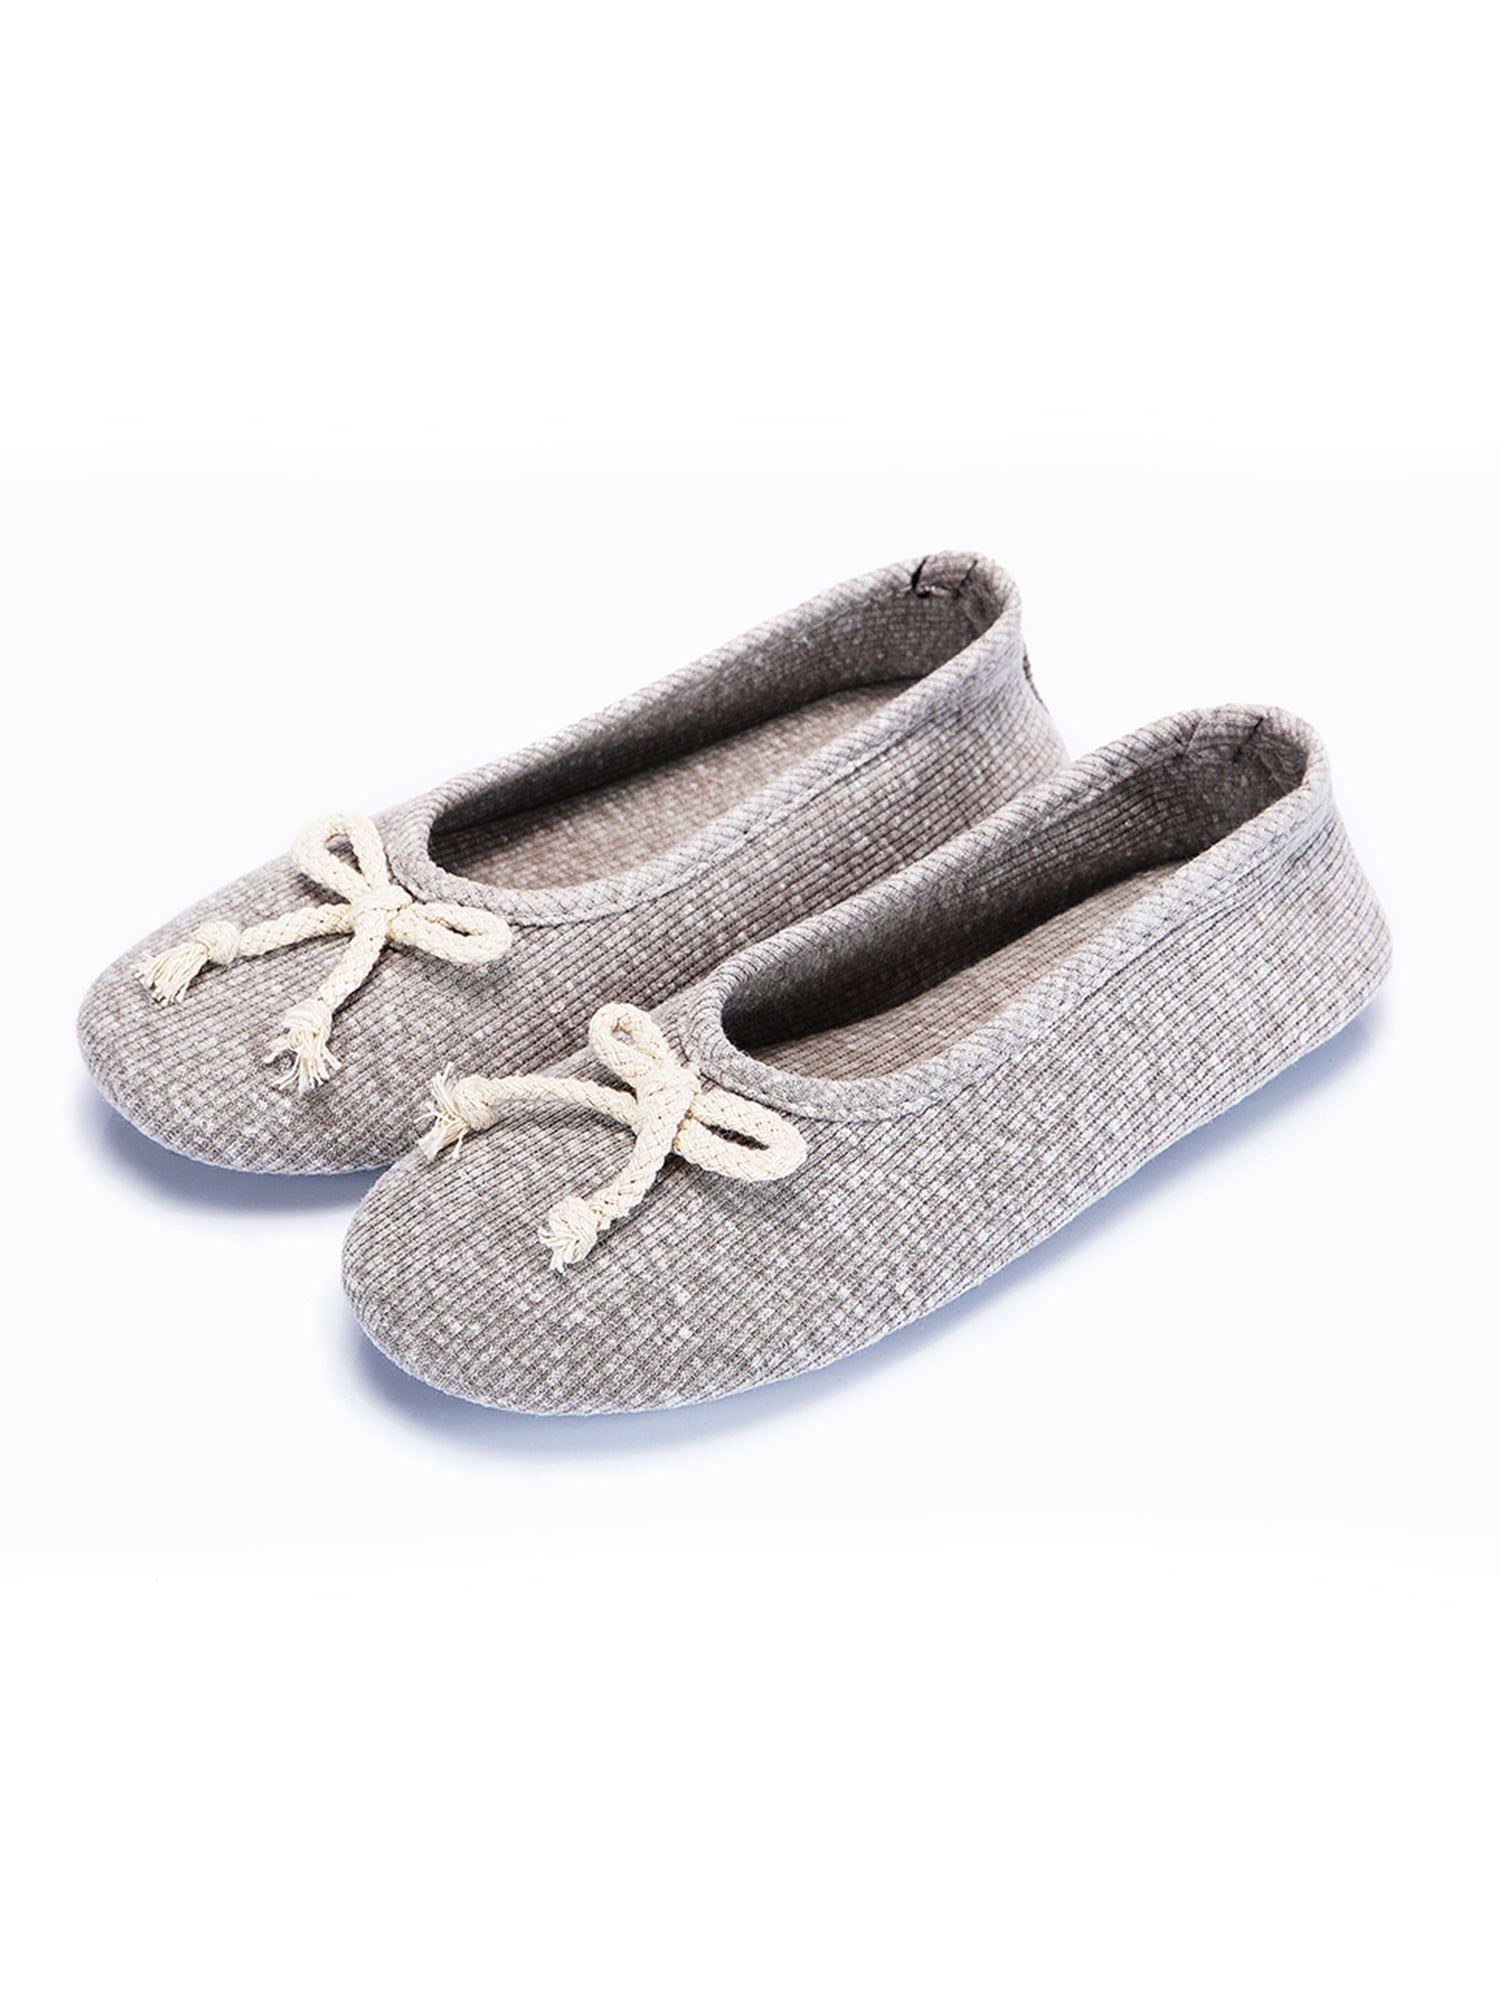 JOINFREE Womens House Slippers Anti-Slip Sole Closed Toe & Back Cozy Indoor Shoes